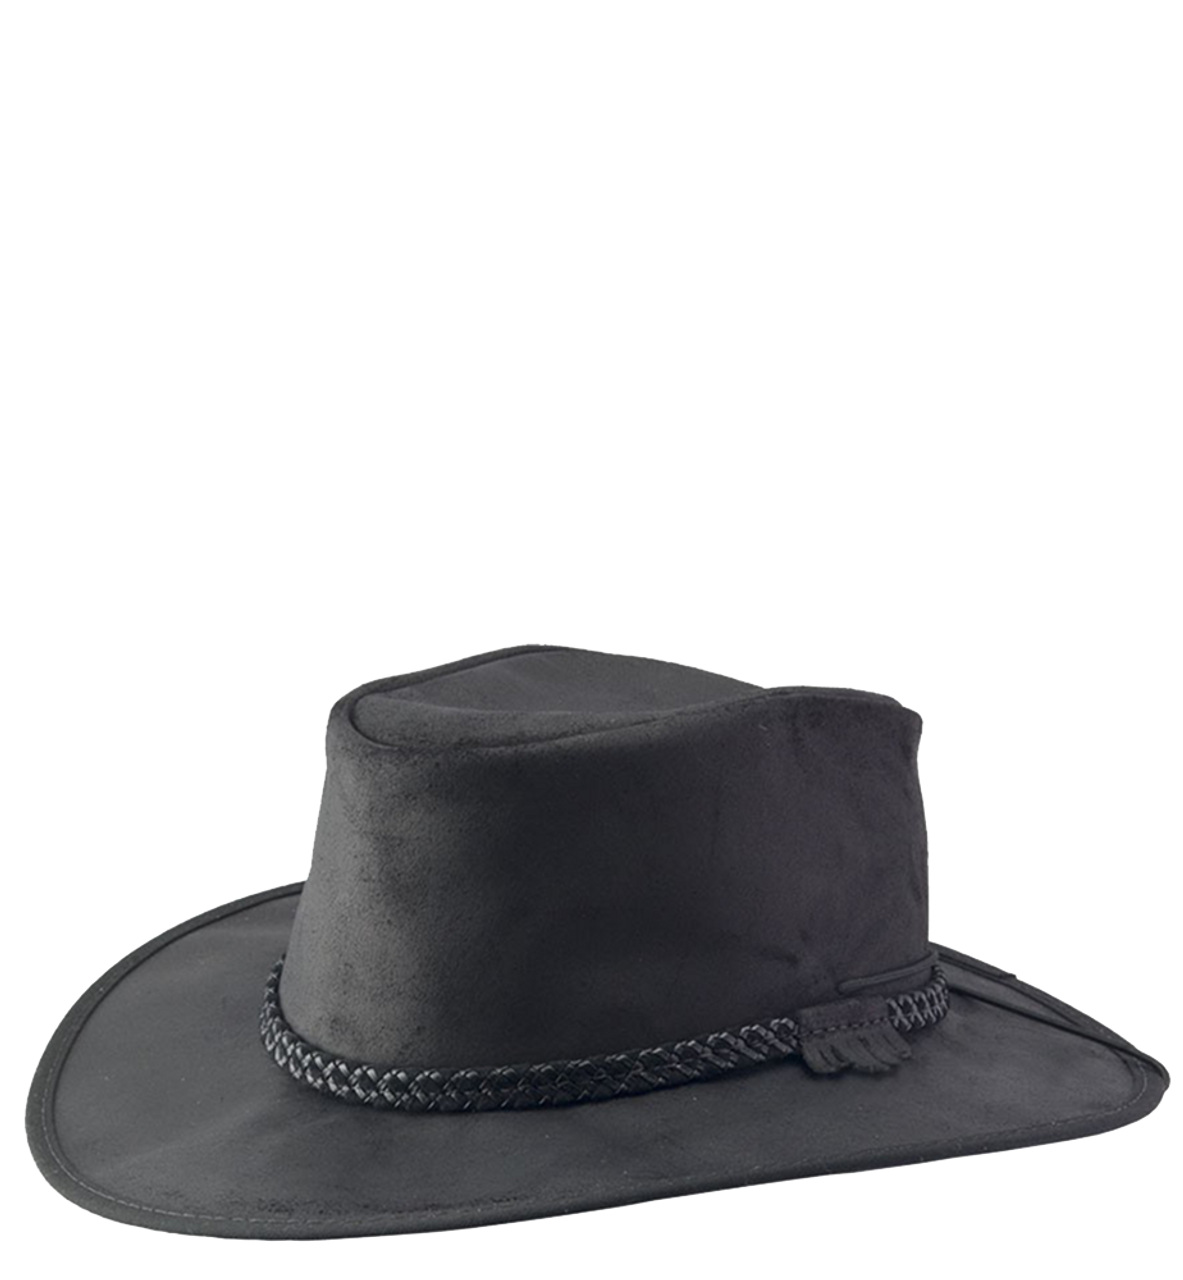 Men's Crusher Leather Hat - Black - Stages West